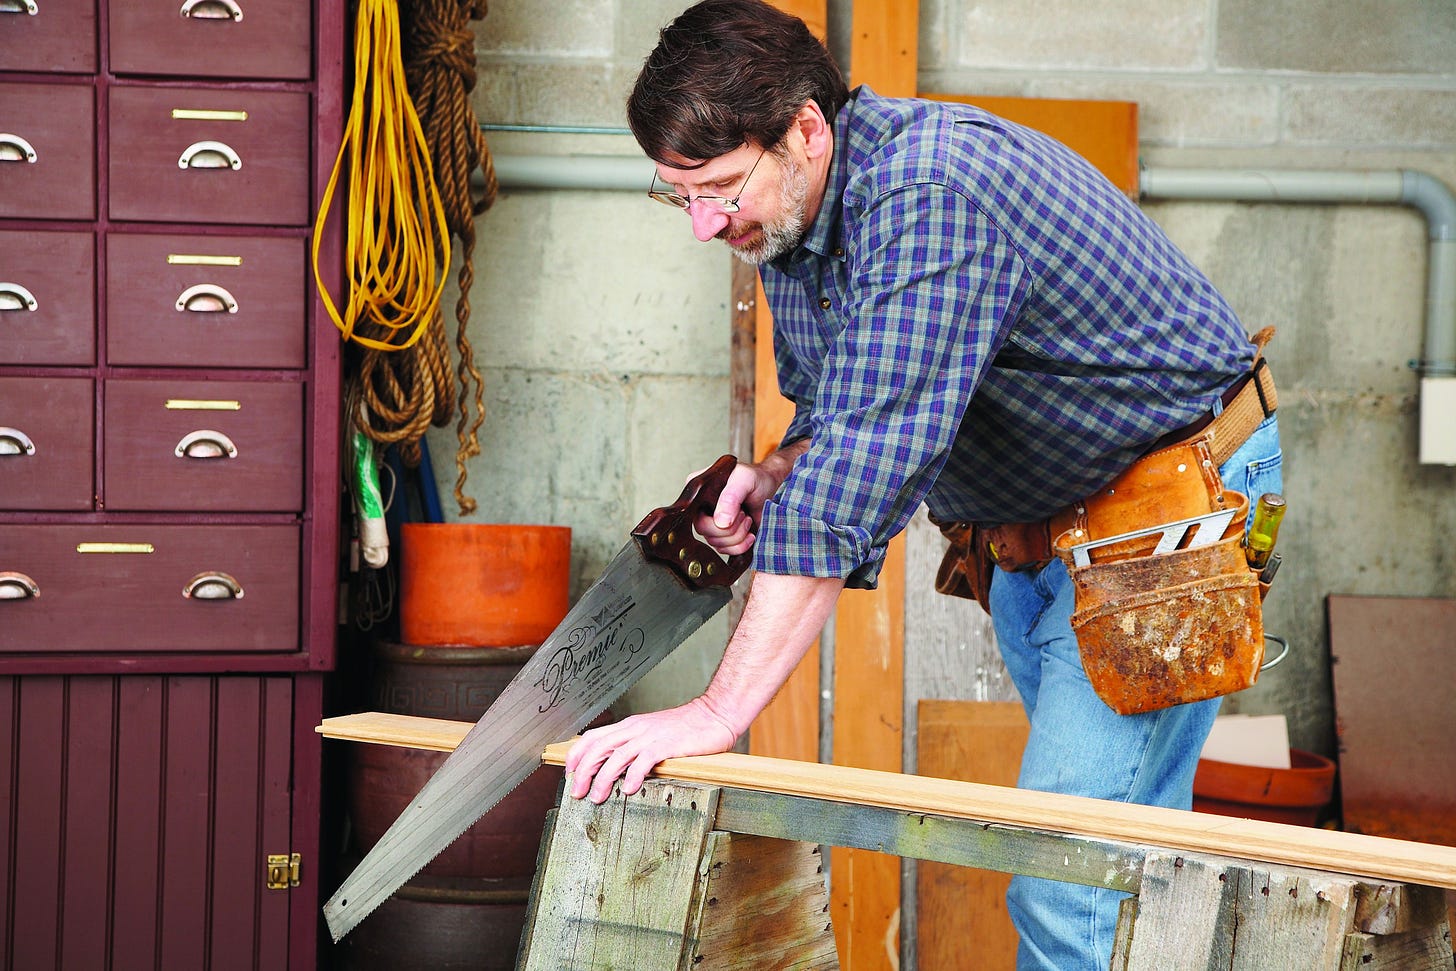 Norm Abram saws a board in his workshop